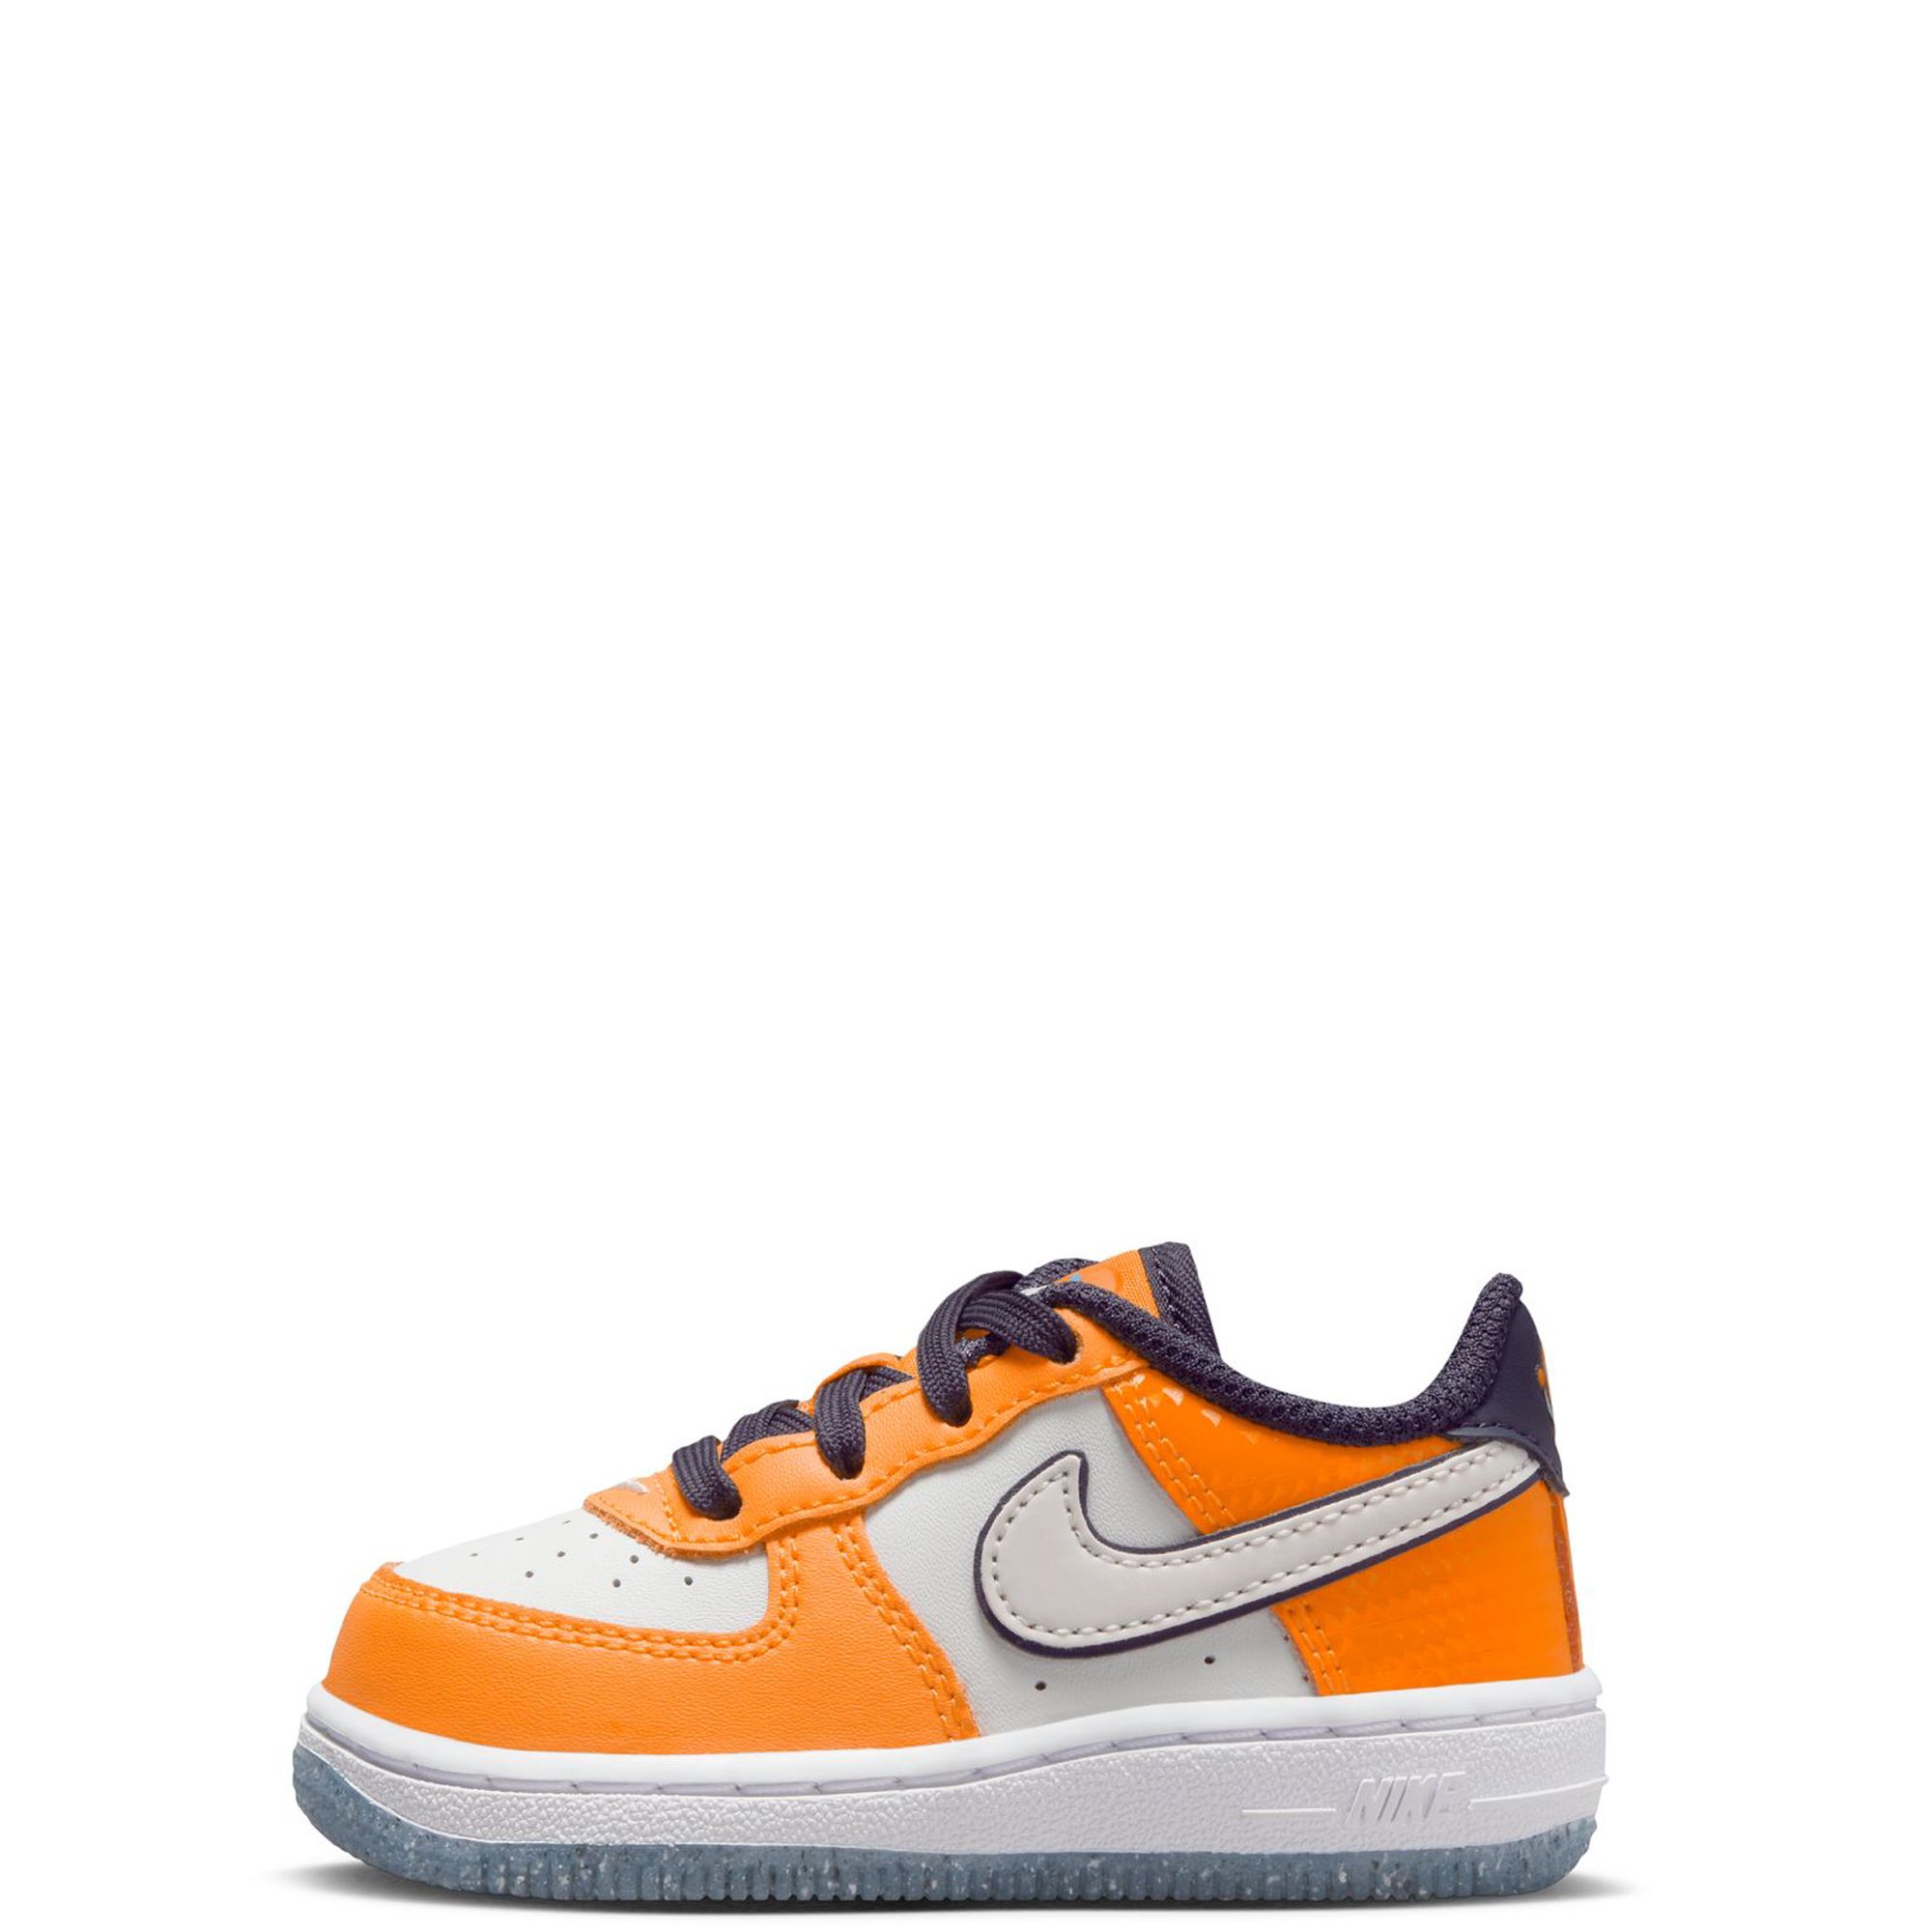 Kids Toddler Nike Air Force 1 Mid Casual Shoes